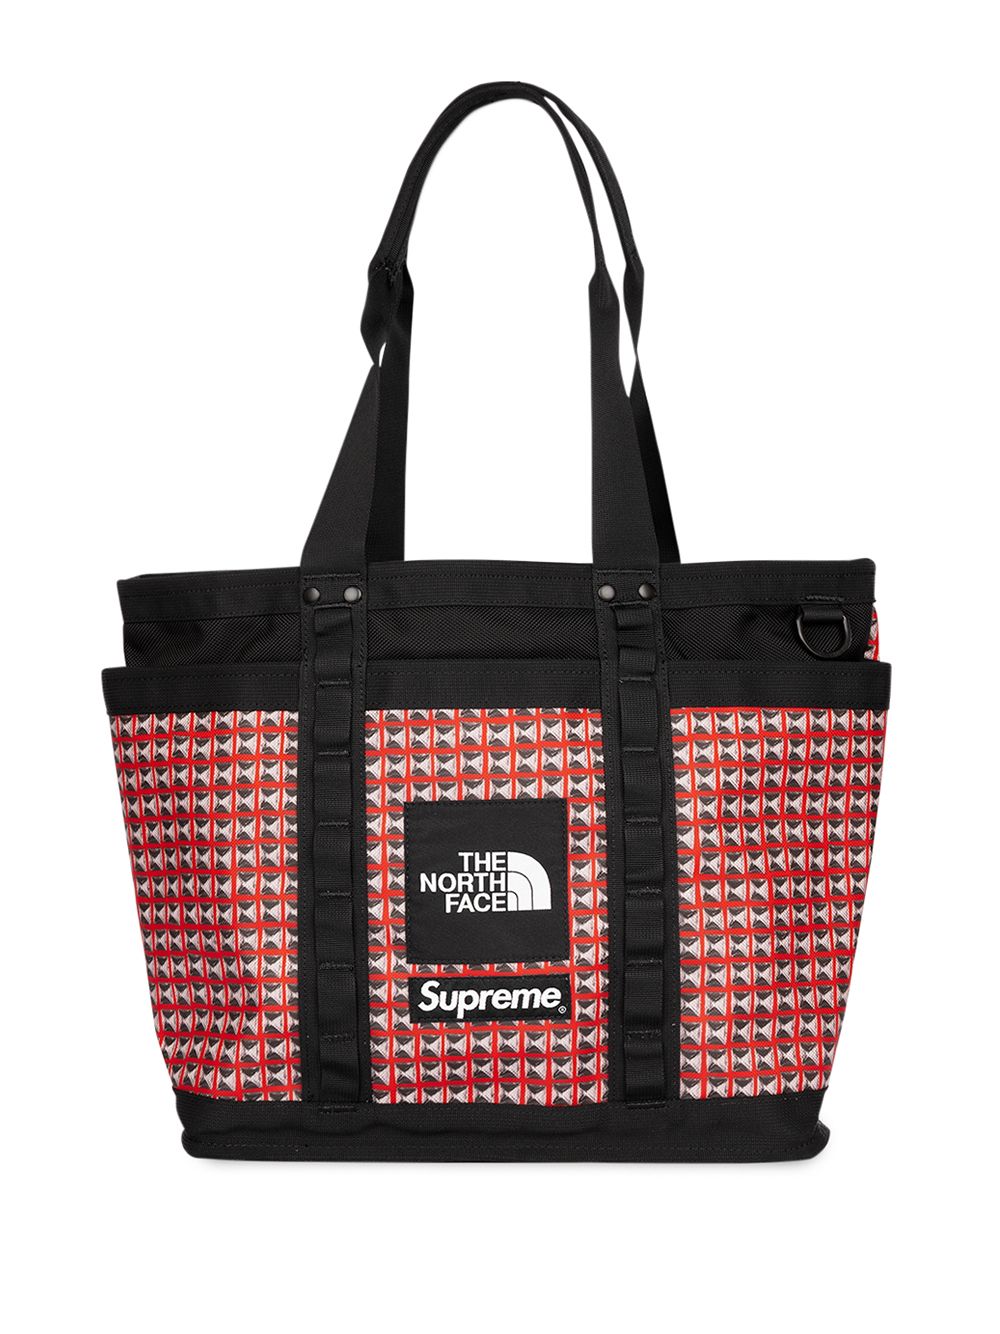 Supreme x The North Face + Studded Explore Utility tote bag